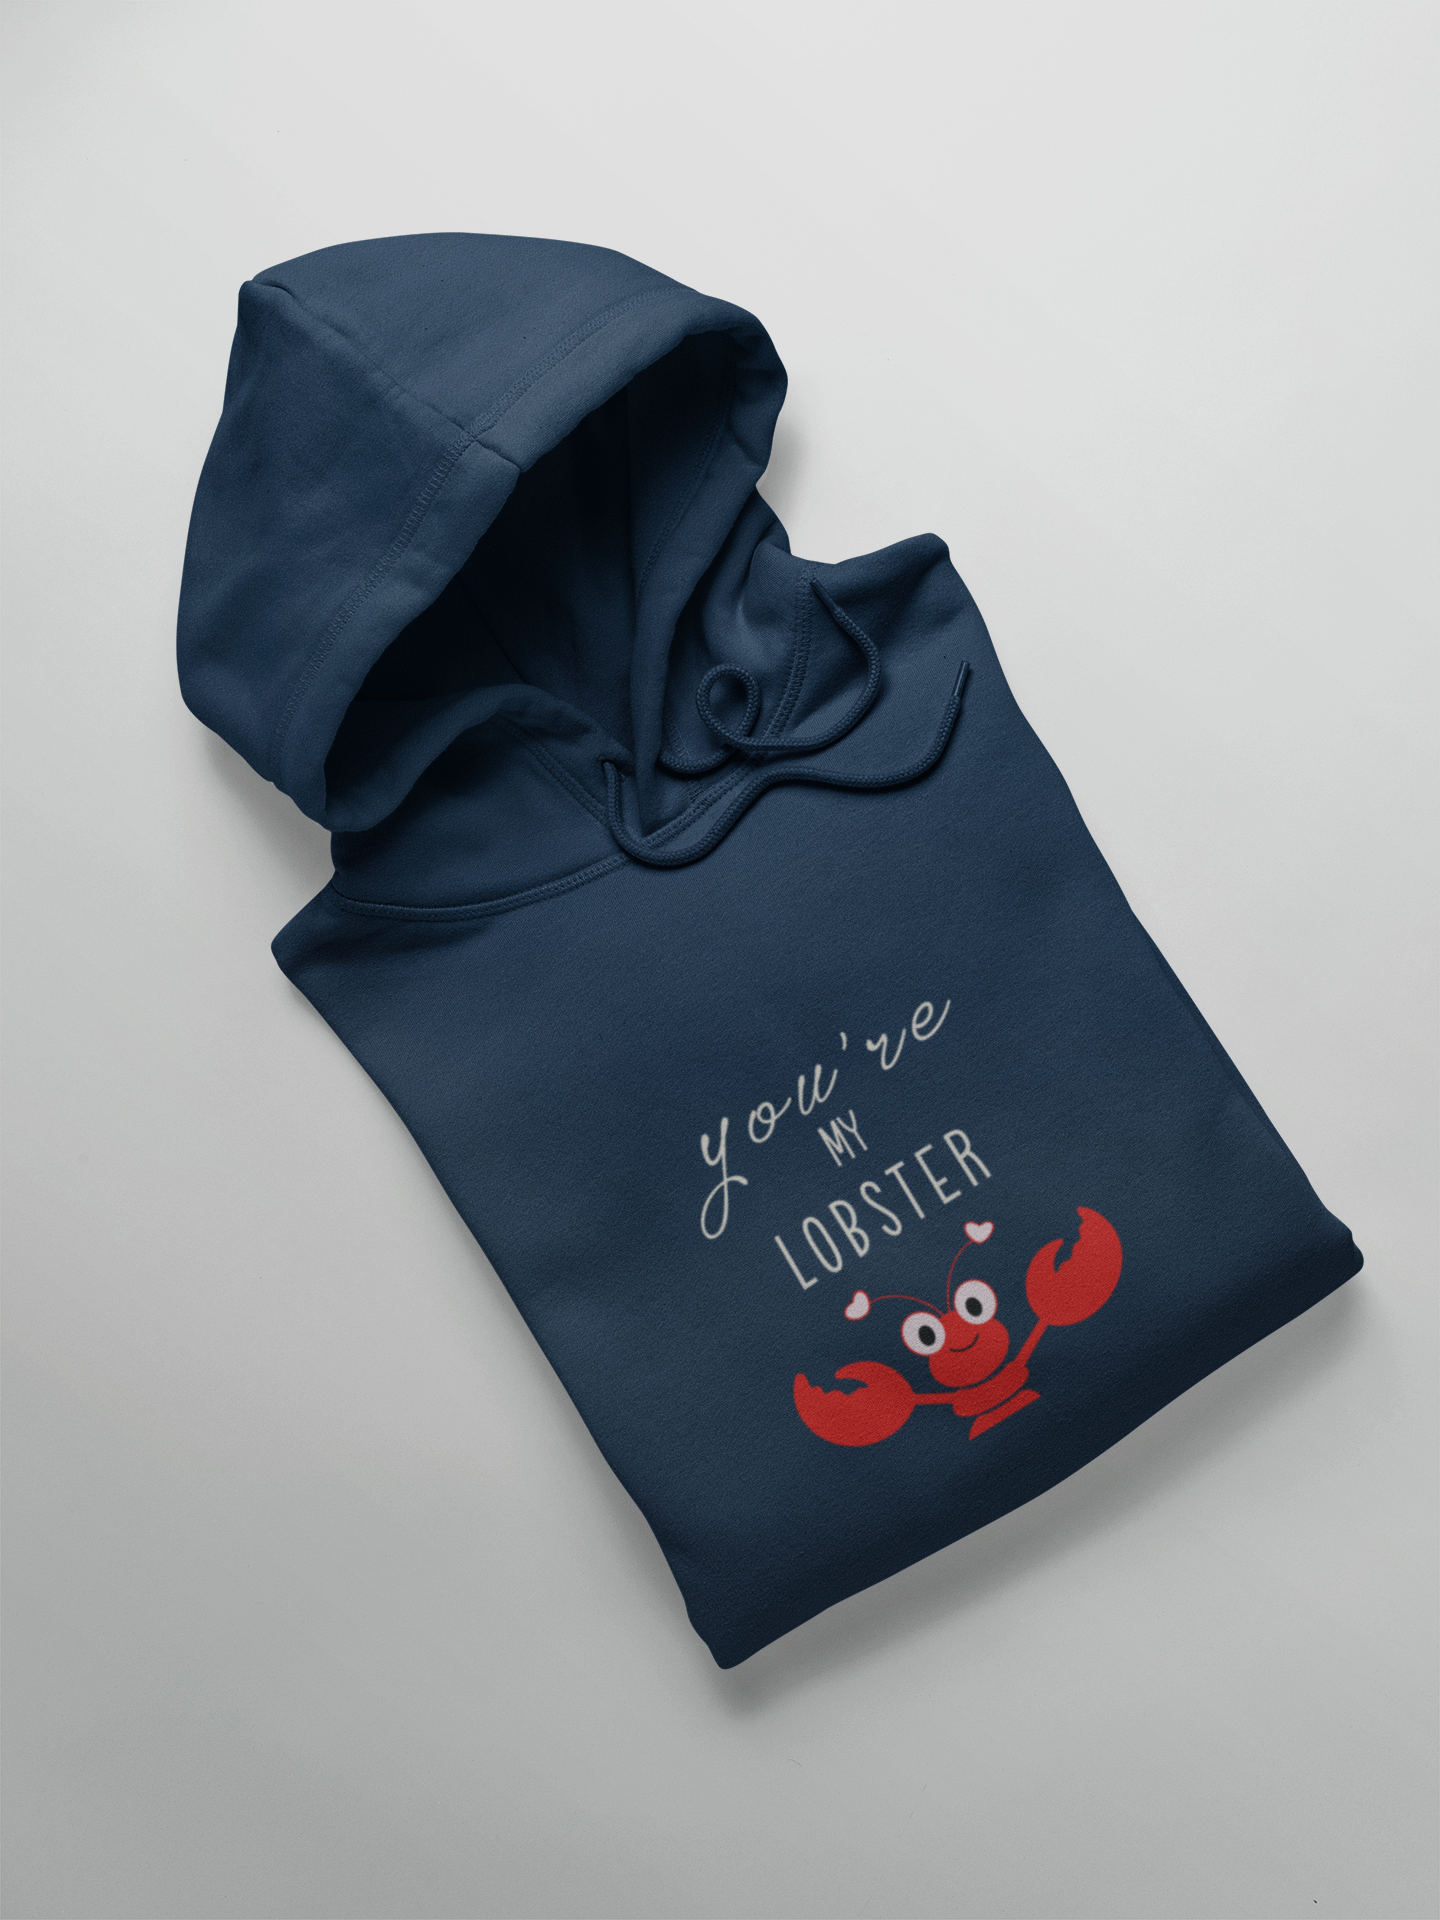 You Are My Lobster: Friends- Winter Couple Hoodies. BOTH NAVY-BLUE